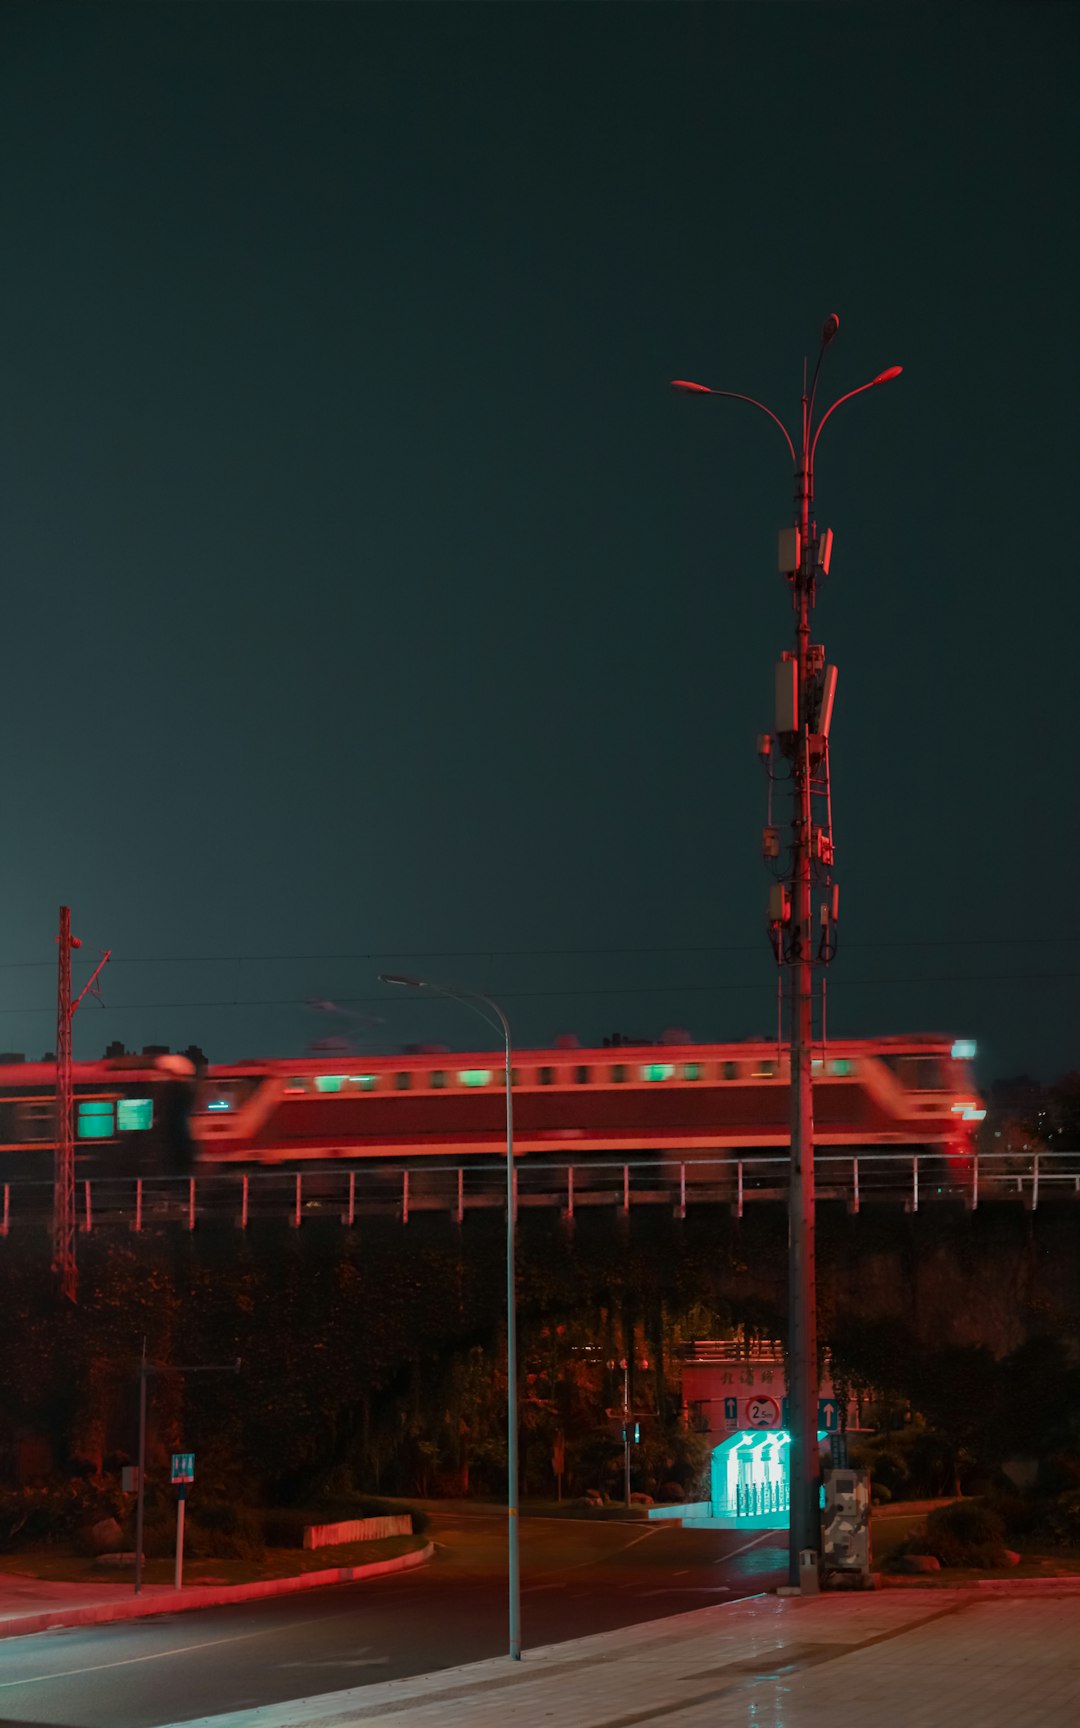 red and white train during night time